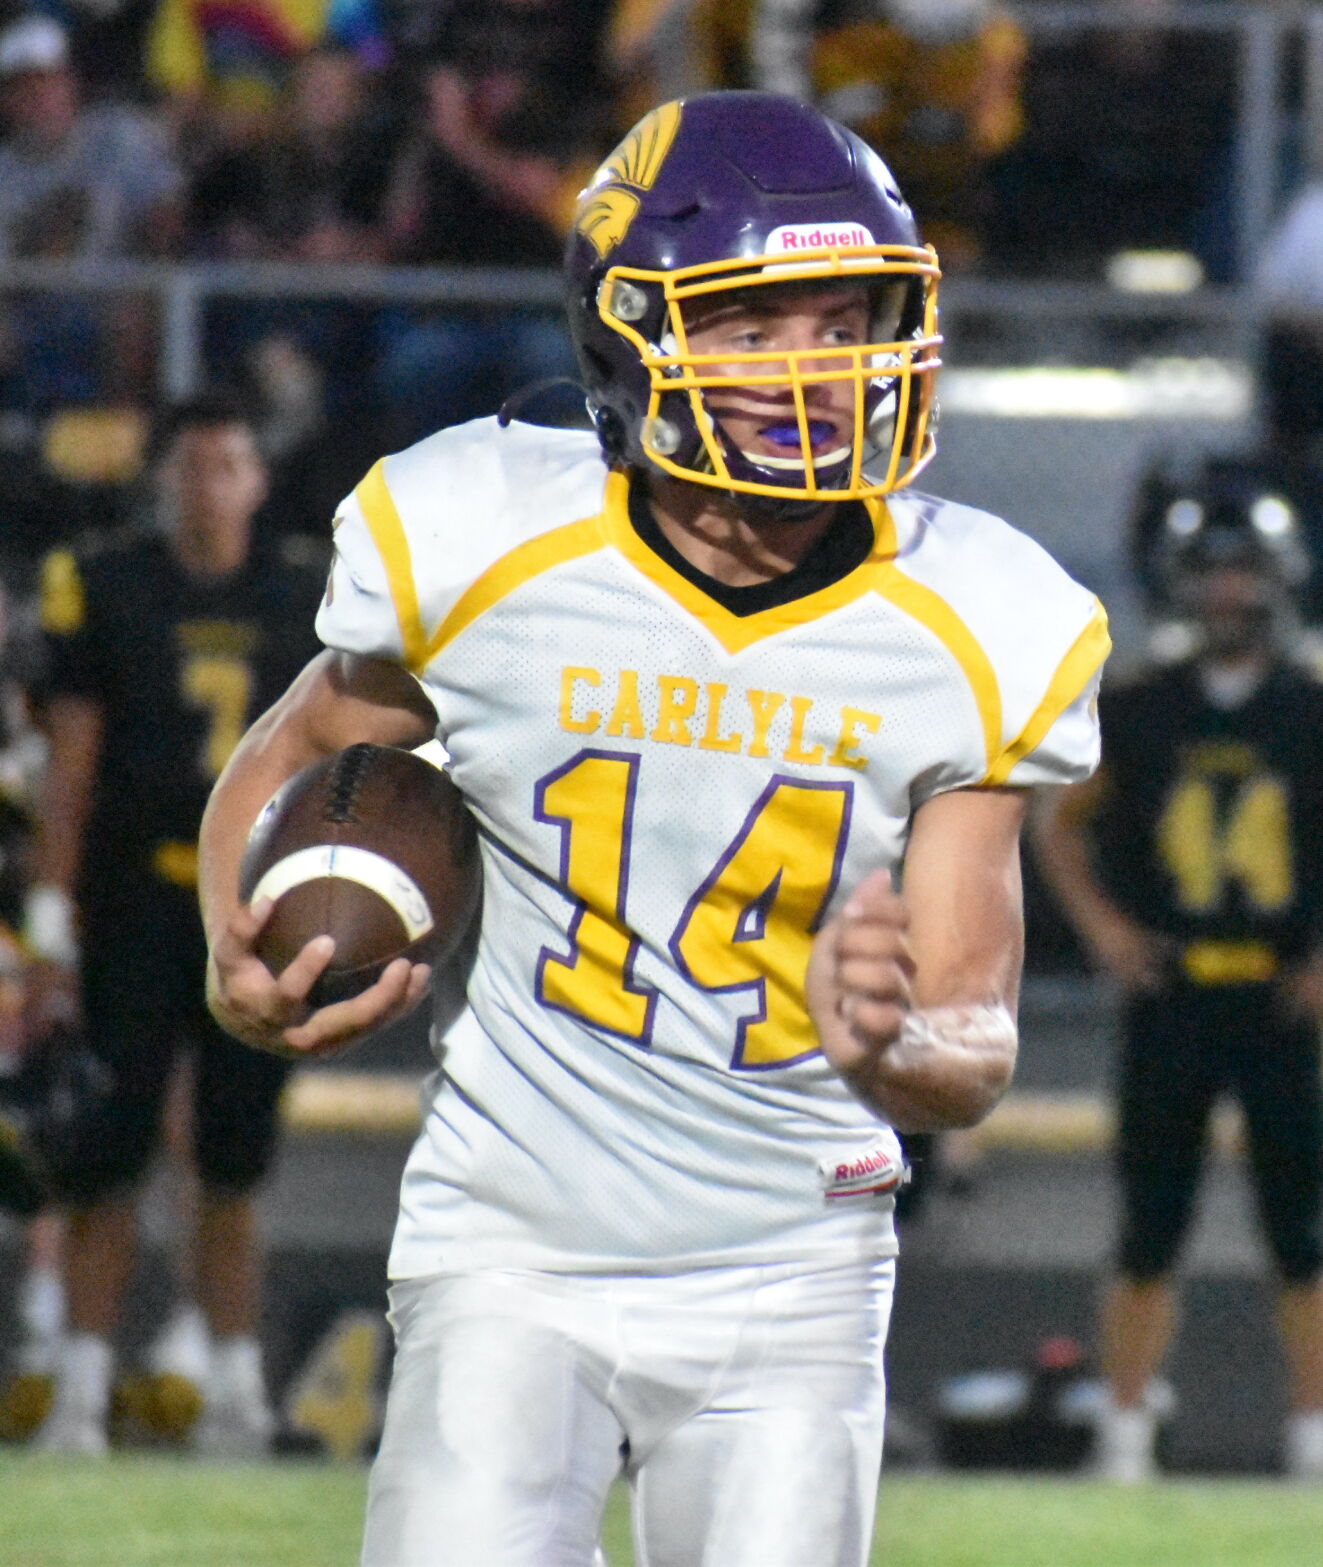 Carlyle football team suffers defeat against Tuscola, complex decisions lay ahead